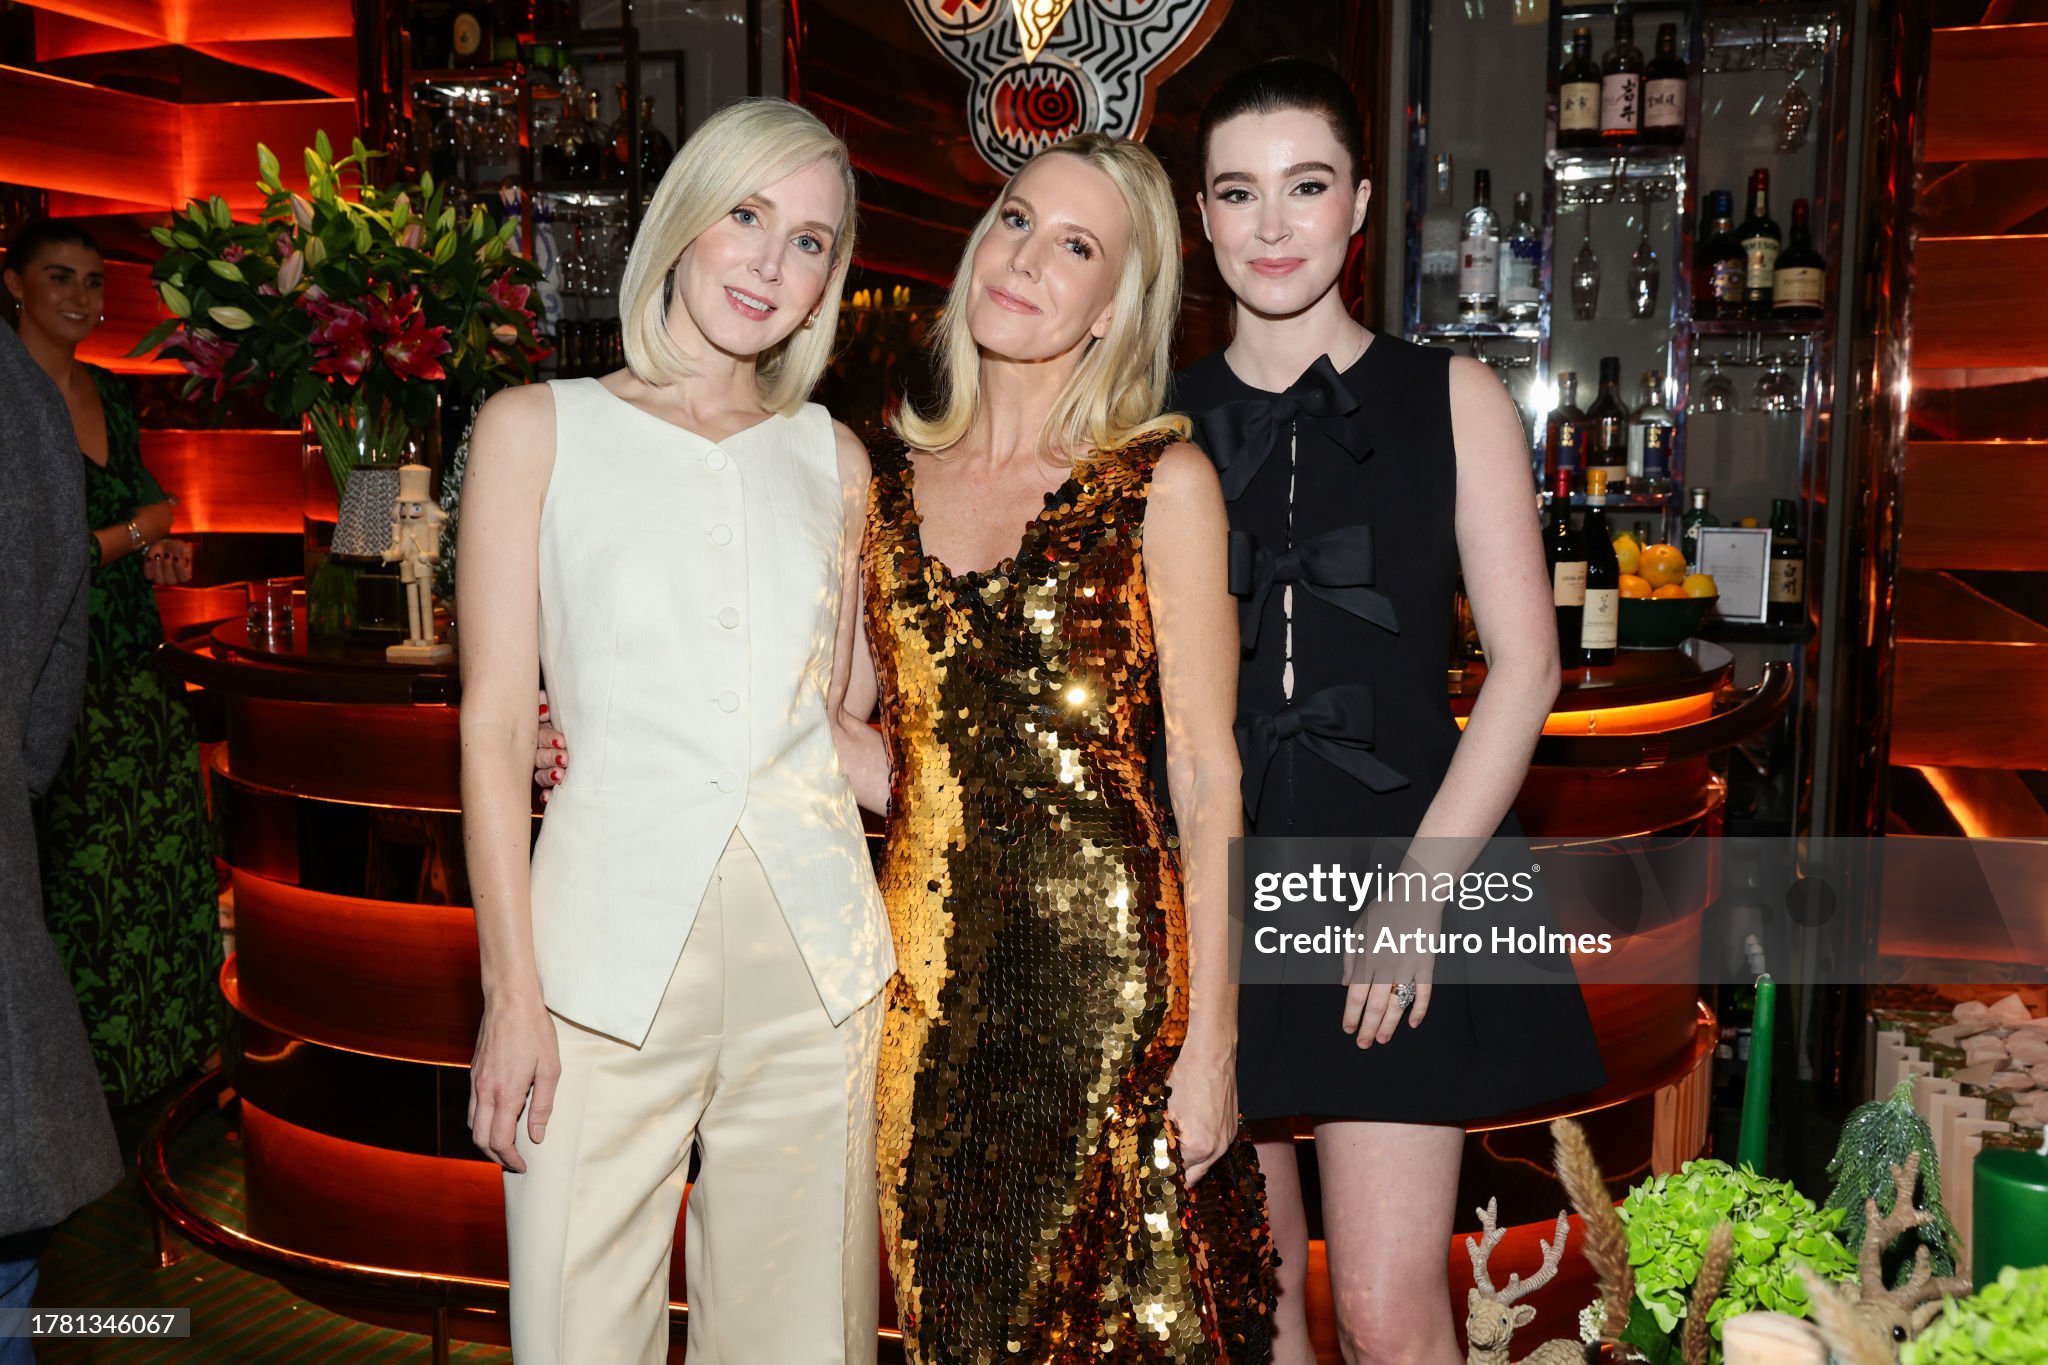 https://media.gettyimages.com/id/1781346067/photo/nina-garcia-alice-naylor-leyland-celebrate-tablescape-and-holiday-collection.jpg?s=2048x2048&w=gi&k=20&c=mseoYDNw9K98X-C57kpgDI1reBE4JGP2vZcvGB5oenI=